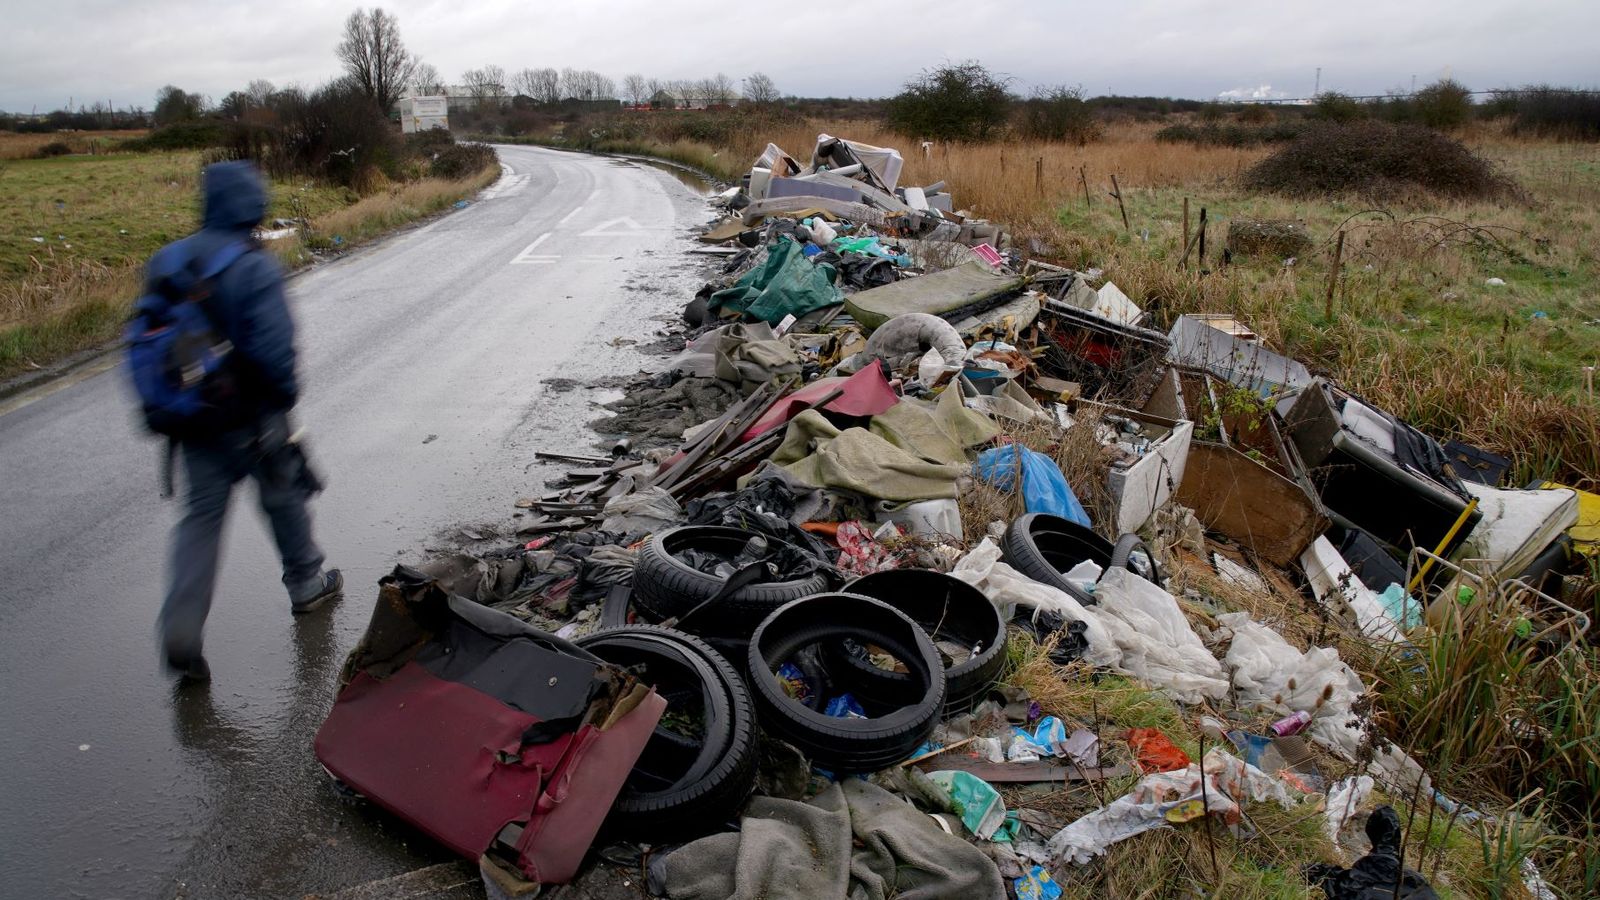 Fly-tipping gangs are costing council millions, new study reveals